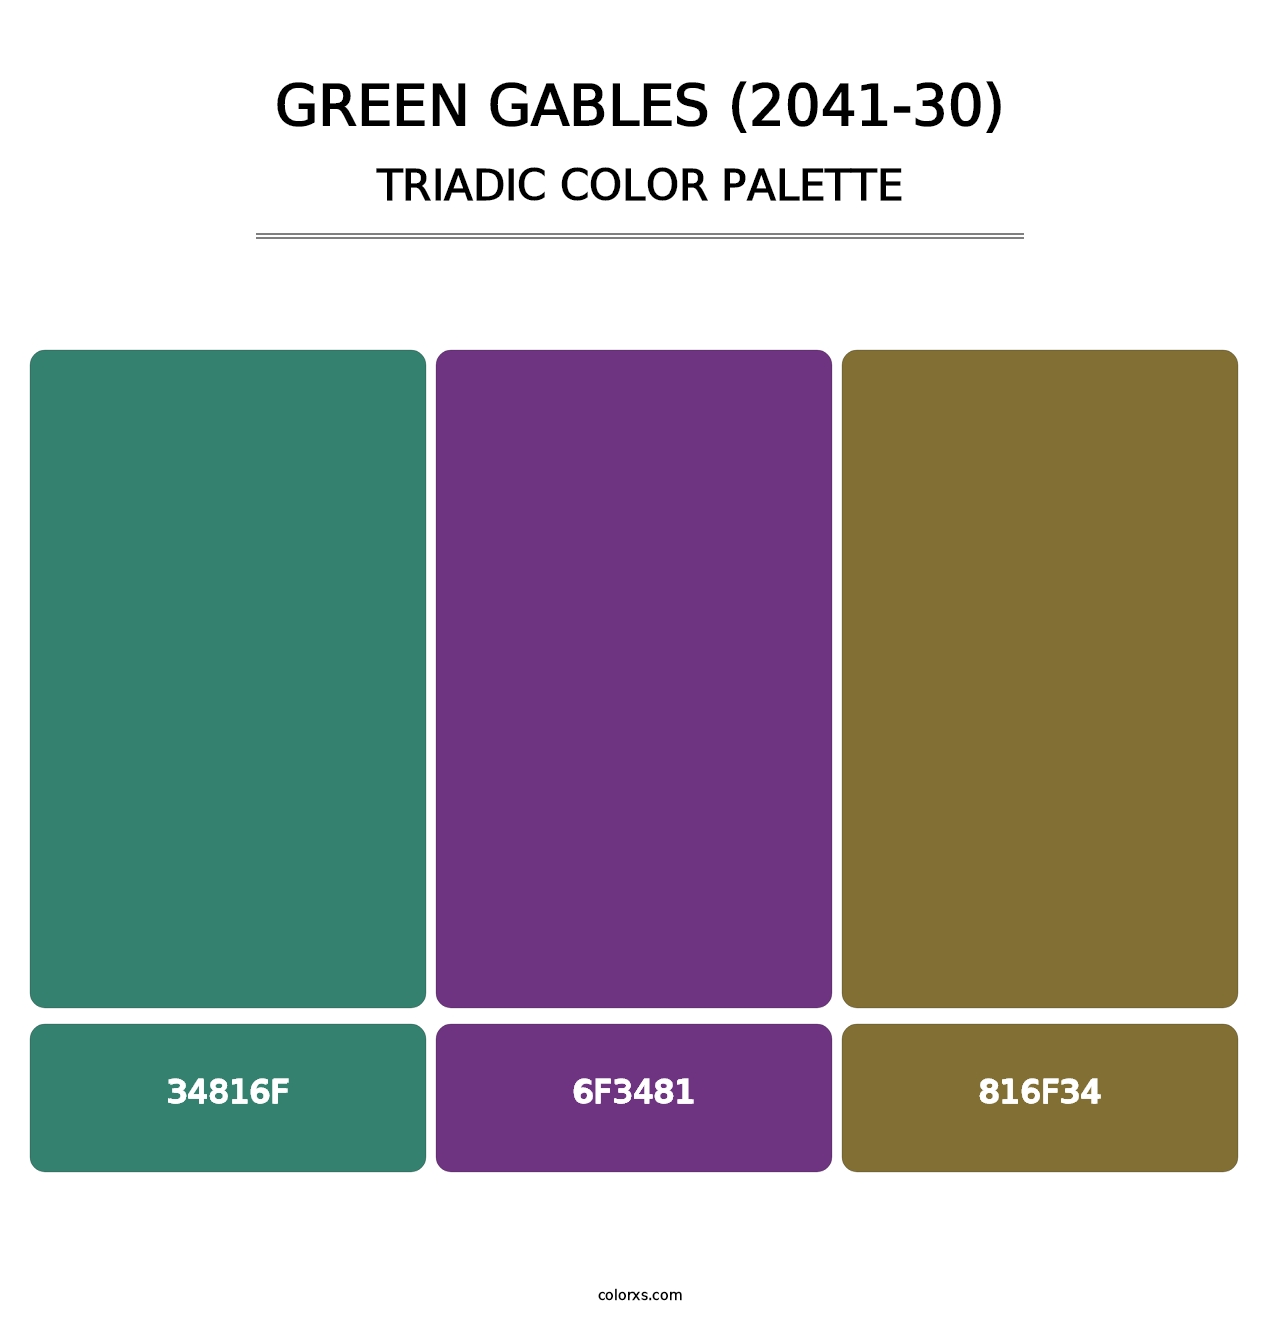 Green Gables (2041-30) - Triadic Color Palette